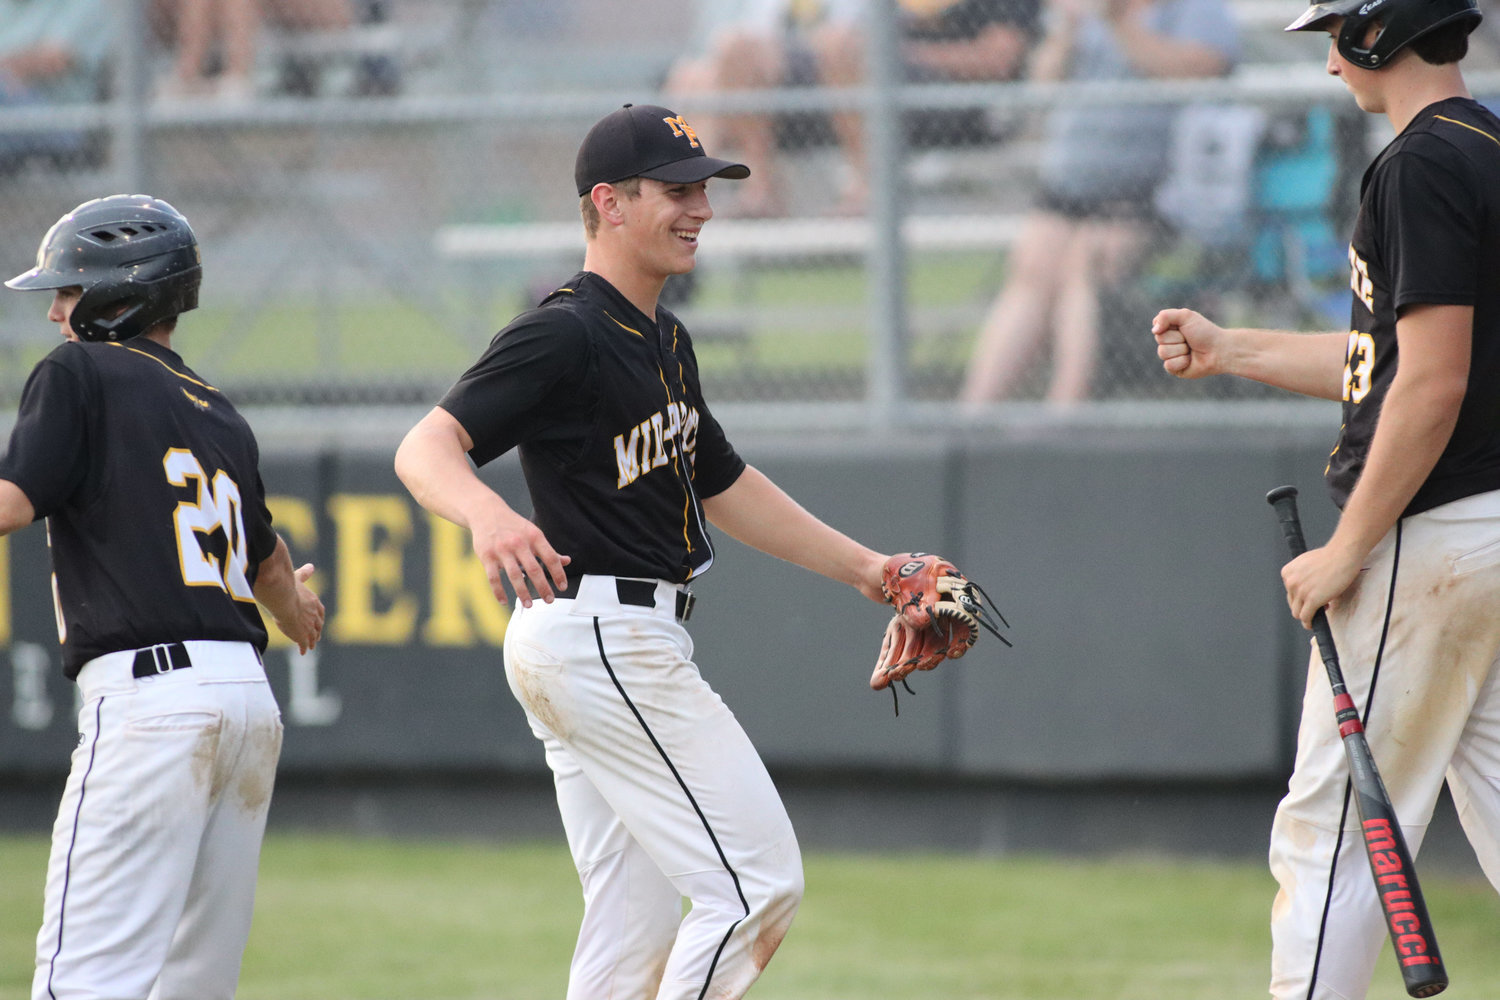 Karson Grout is congratulated by teammates after the final out of an inning during a Mid-Prairie win over Tipton on June 28, 2021.